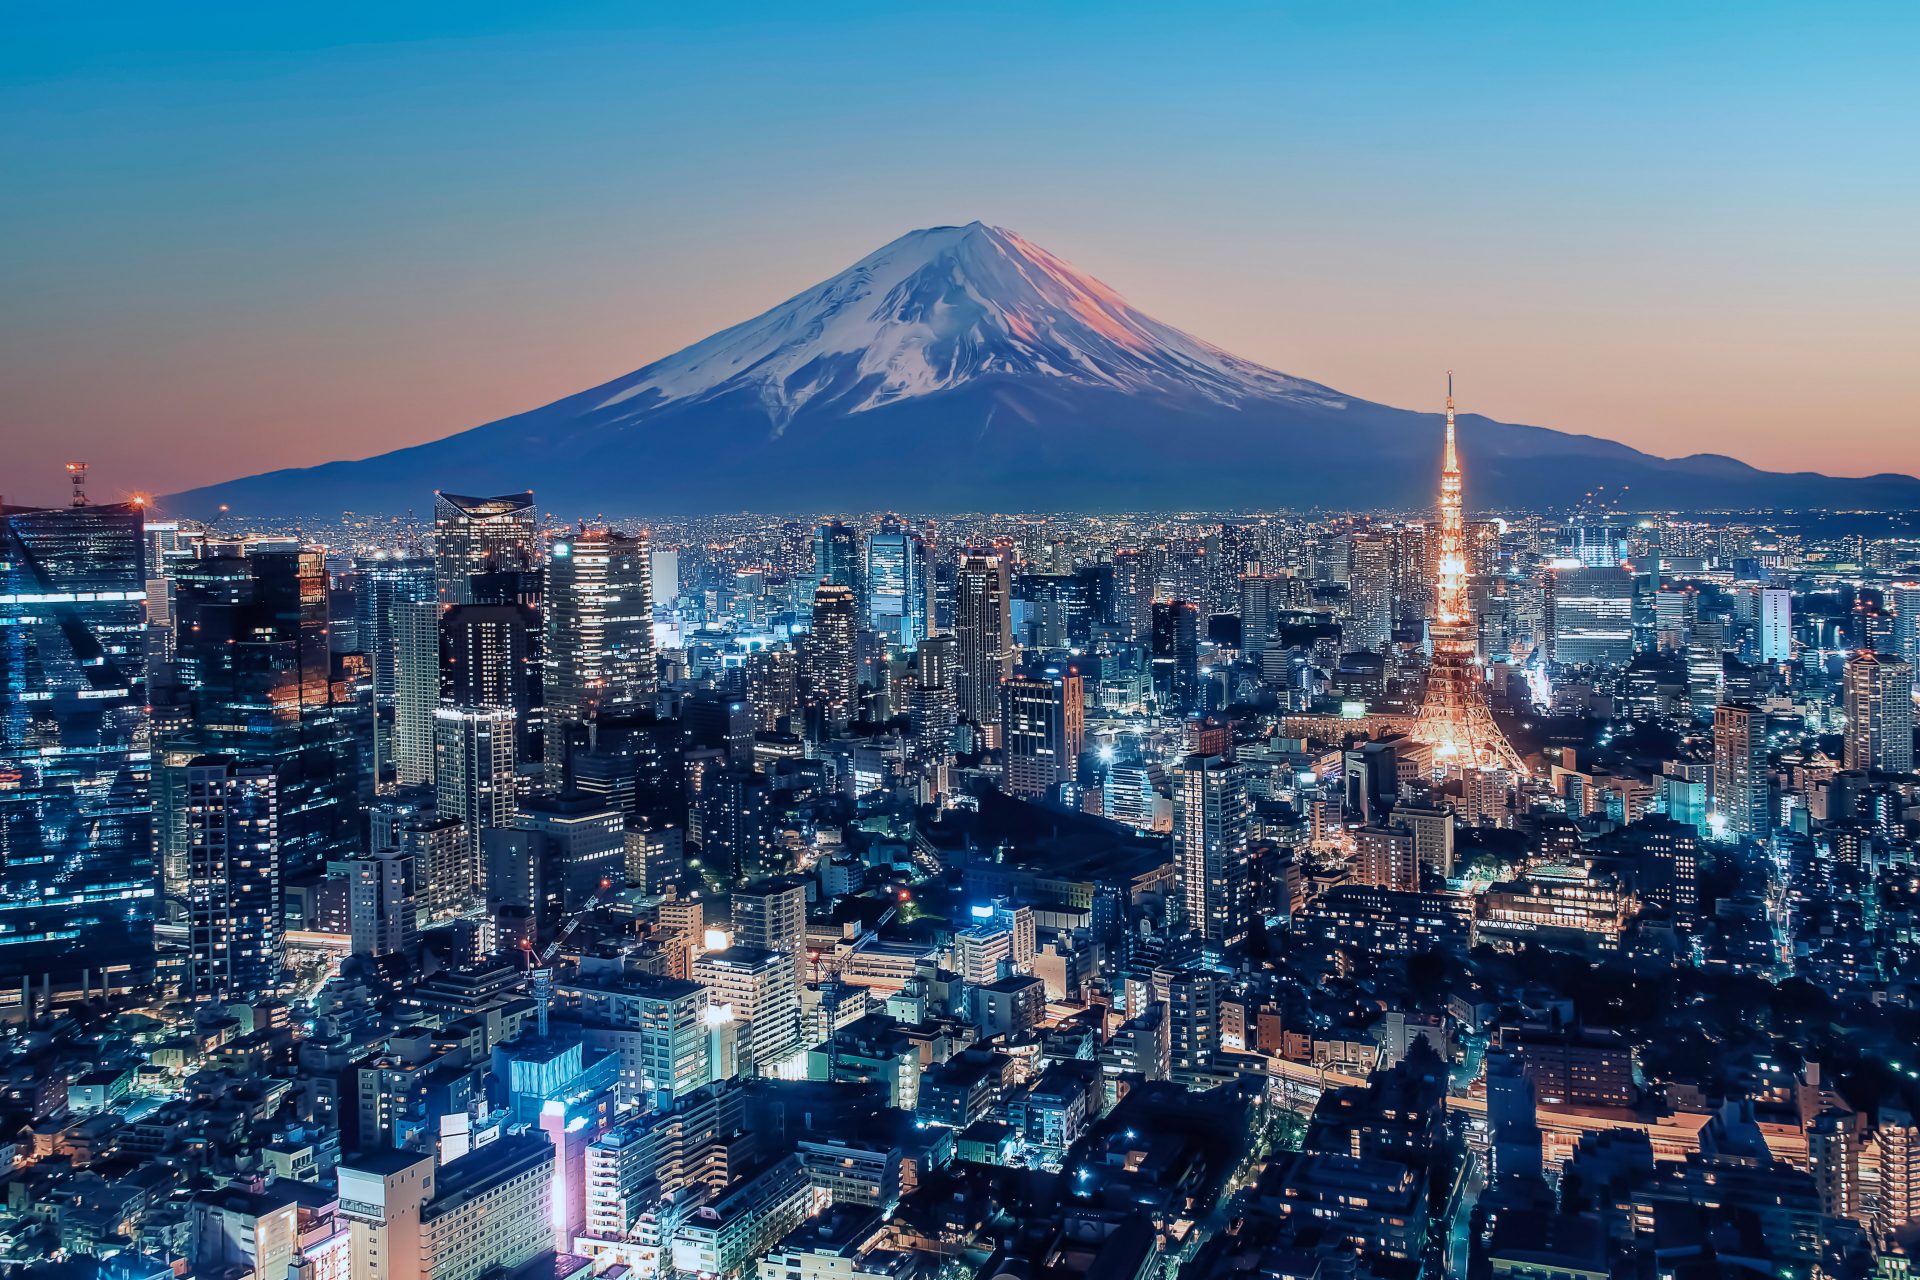 The image shows the city of Tokyo at dusk.